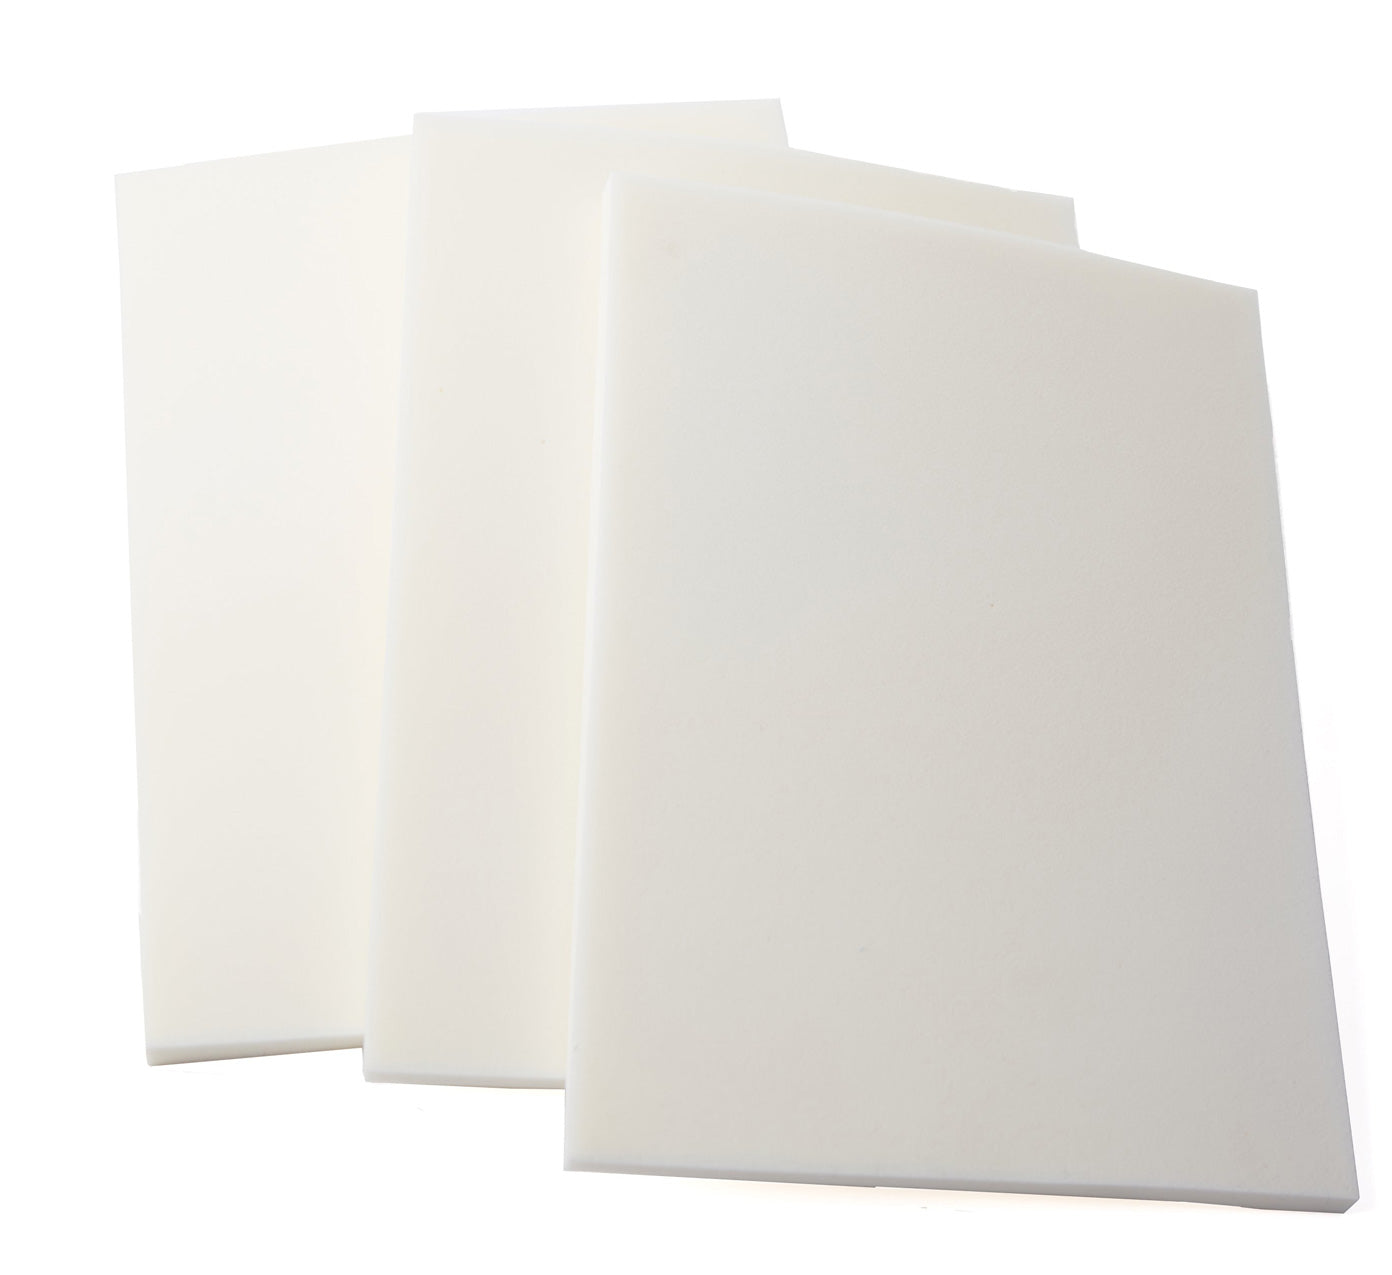 3-Pack Lipo Foam Sheets (8 x 10.5) Patient Pack – NY Cosmetic